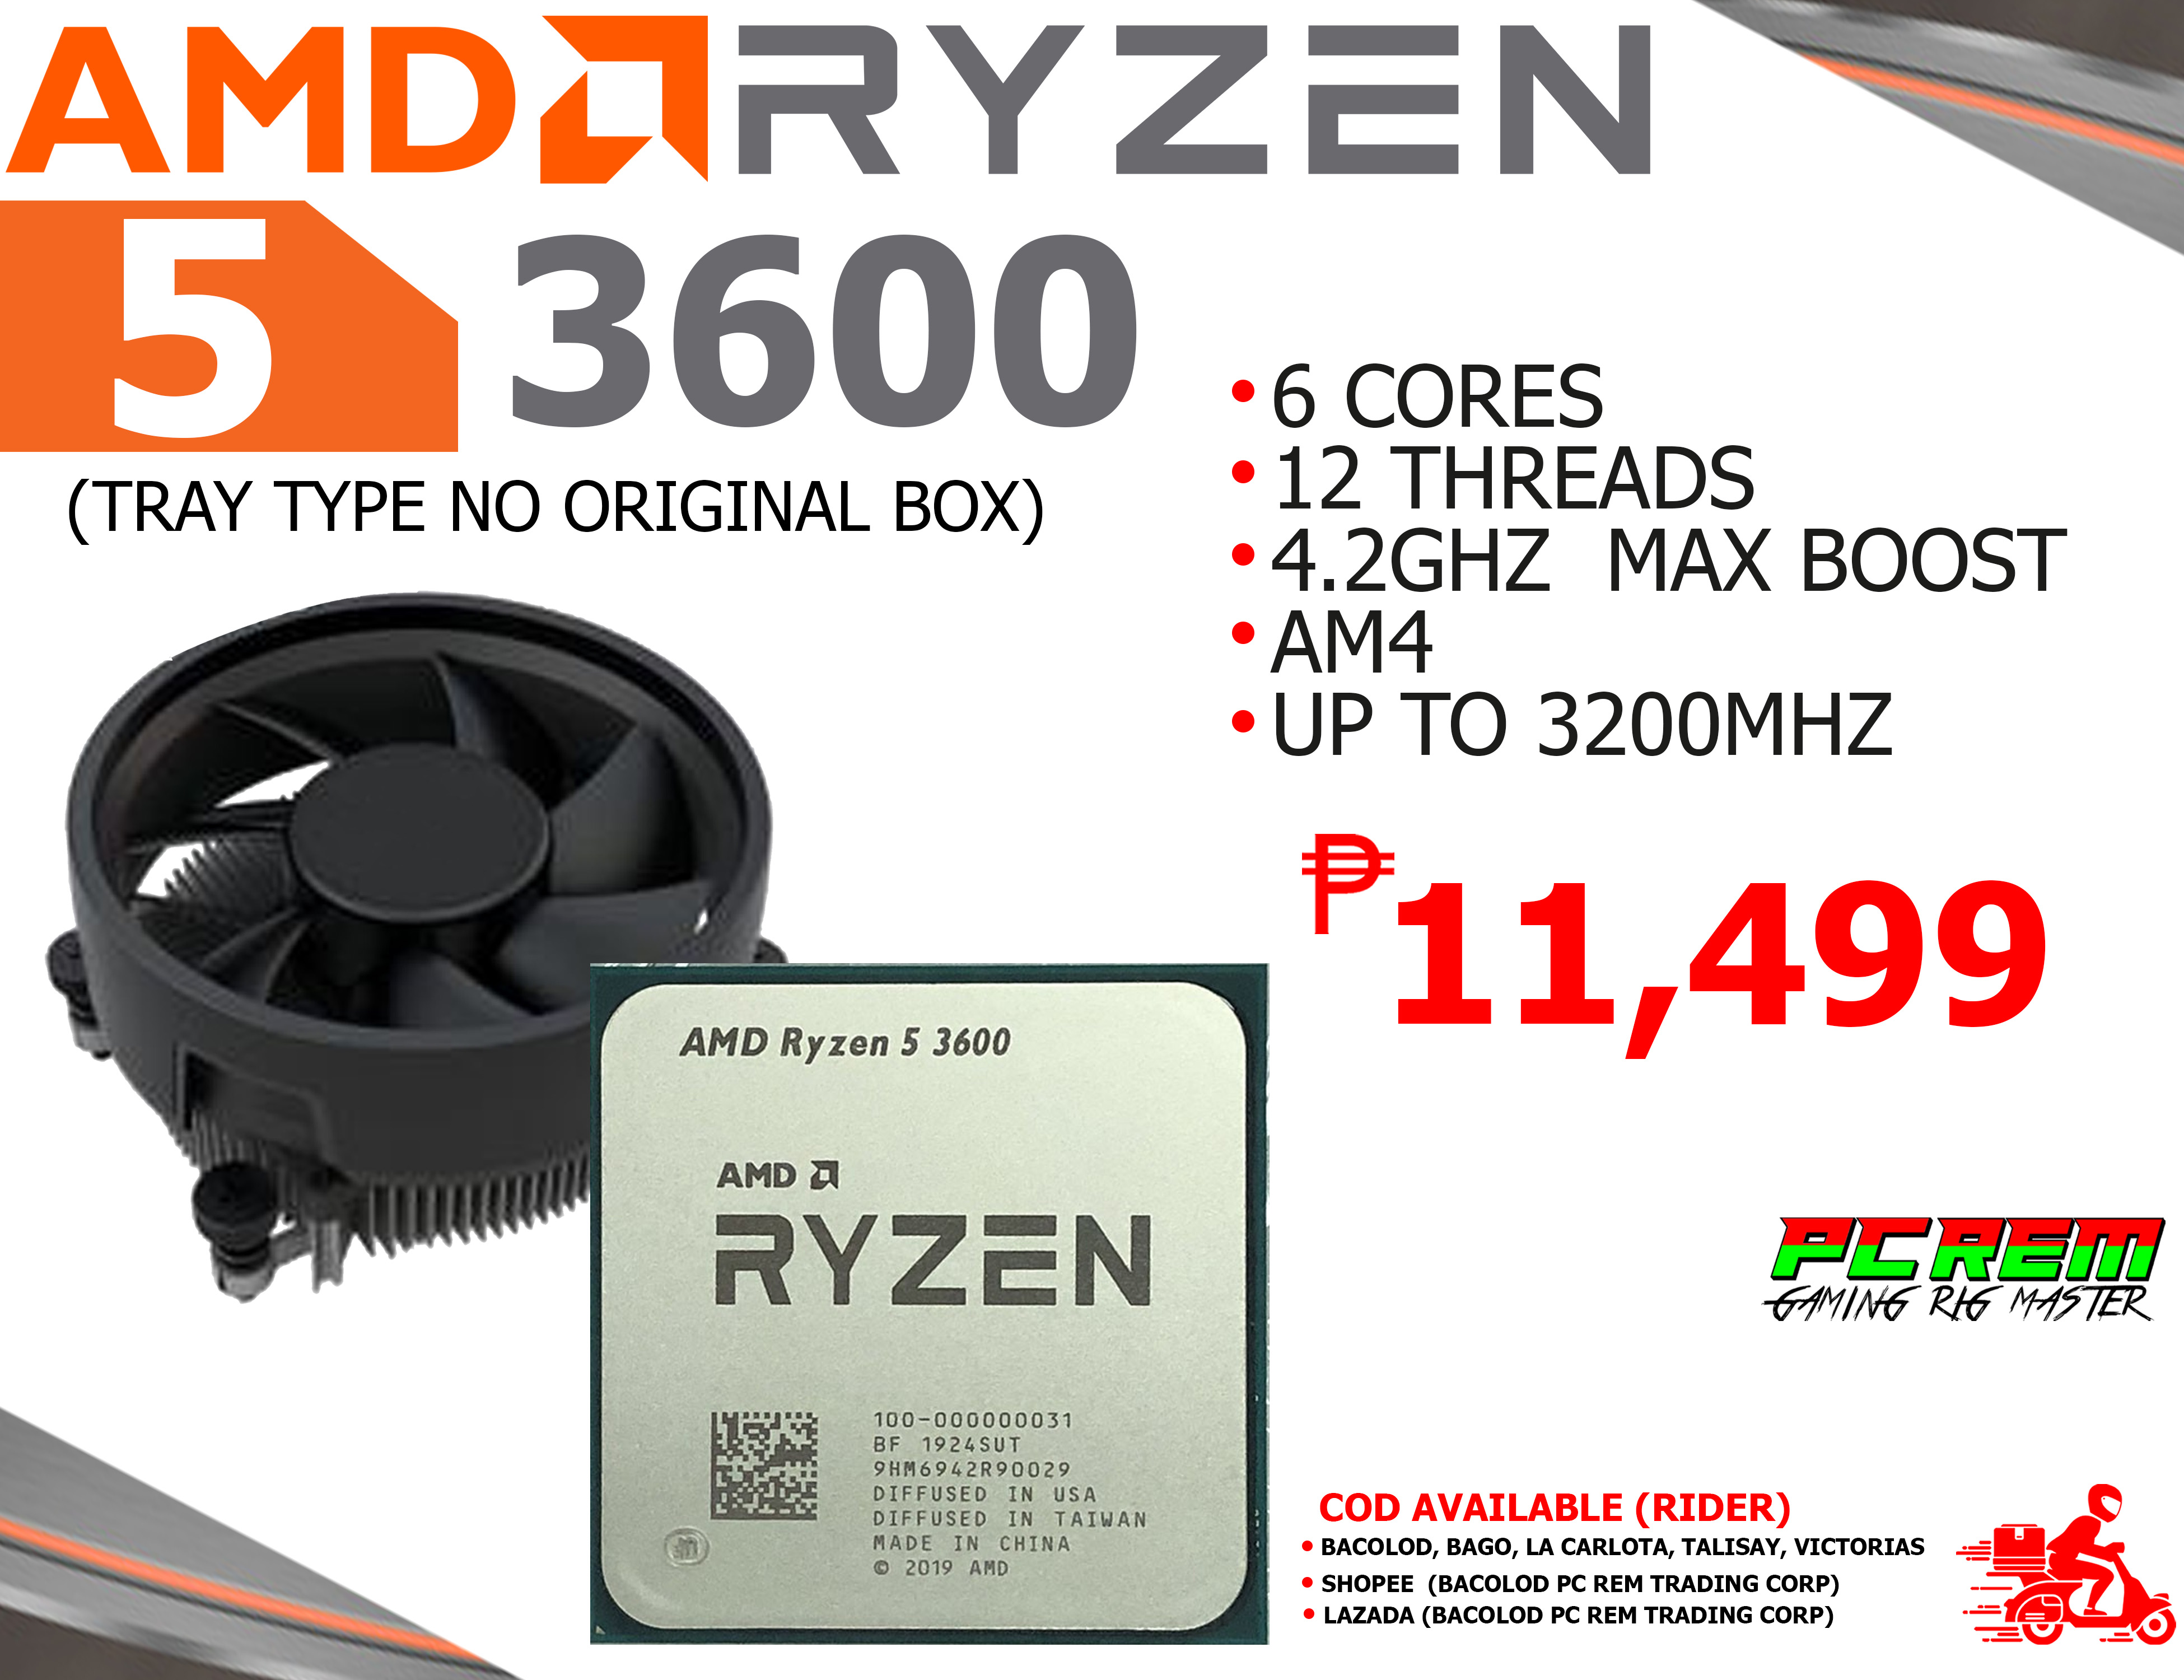 Amd Ryzen 5 3600 Tray Shop Amd Ryzen 5 3600 Tray With Great Discounts And Prices Online Lazada Philippines